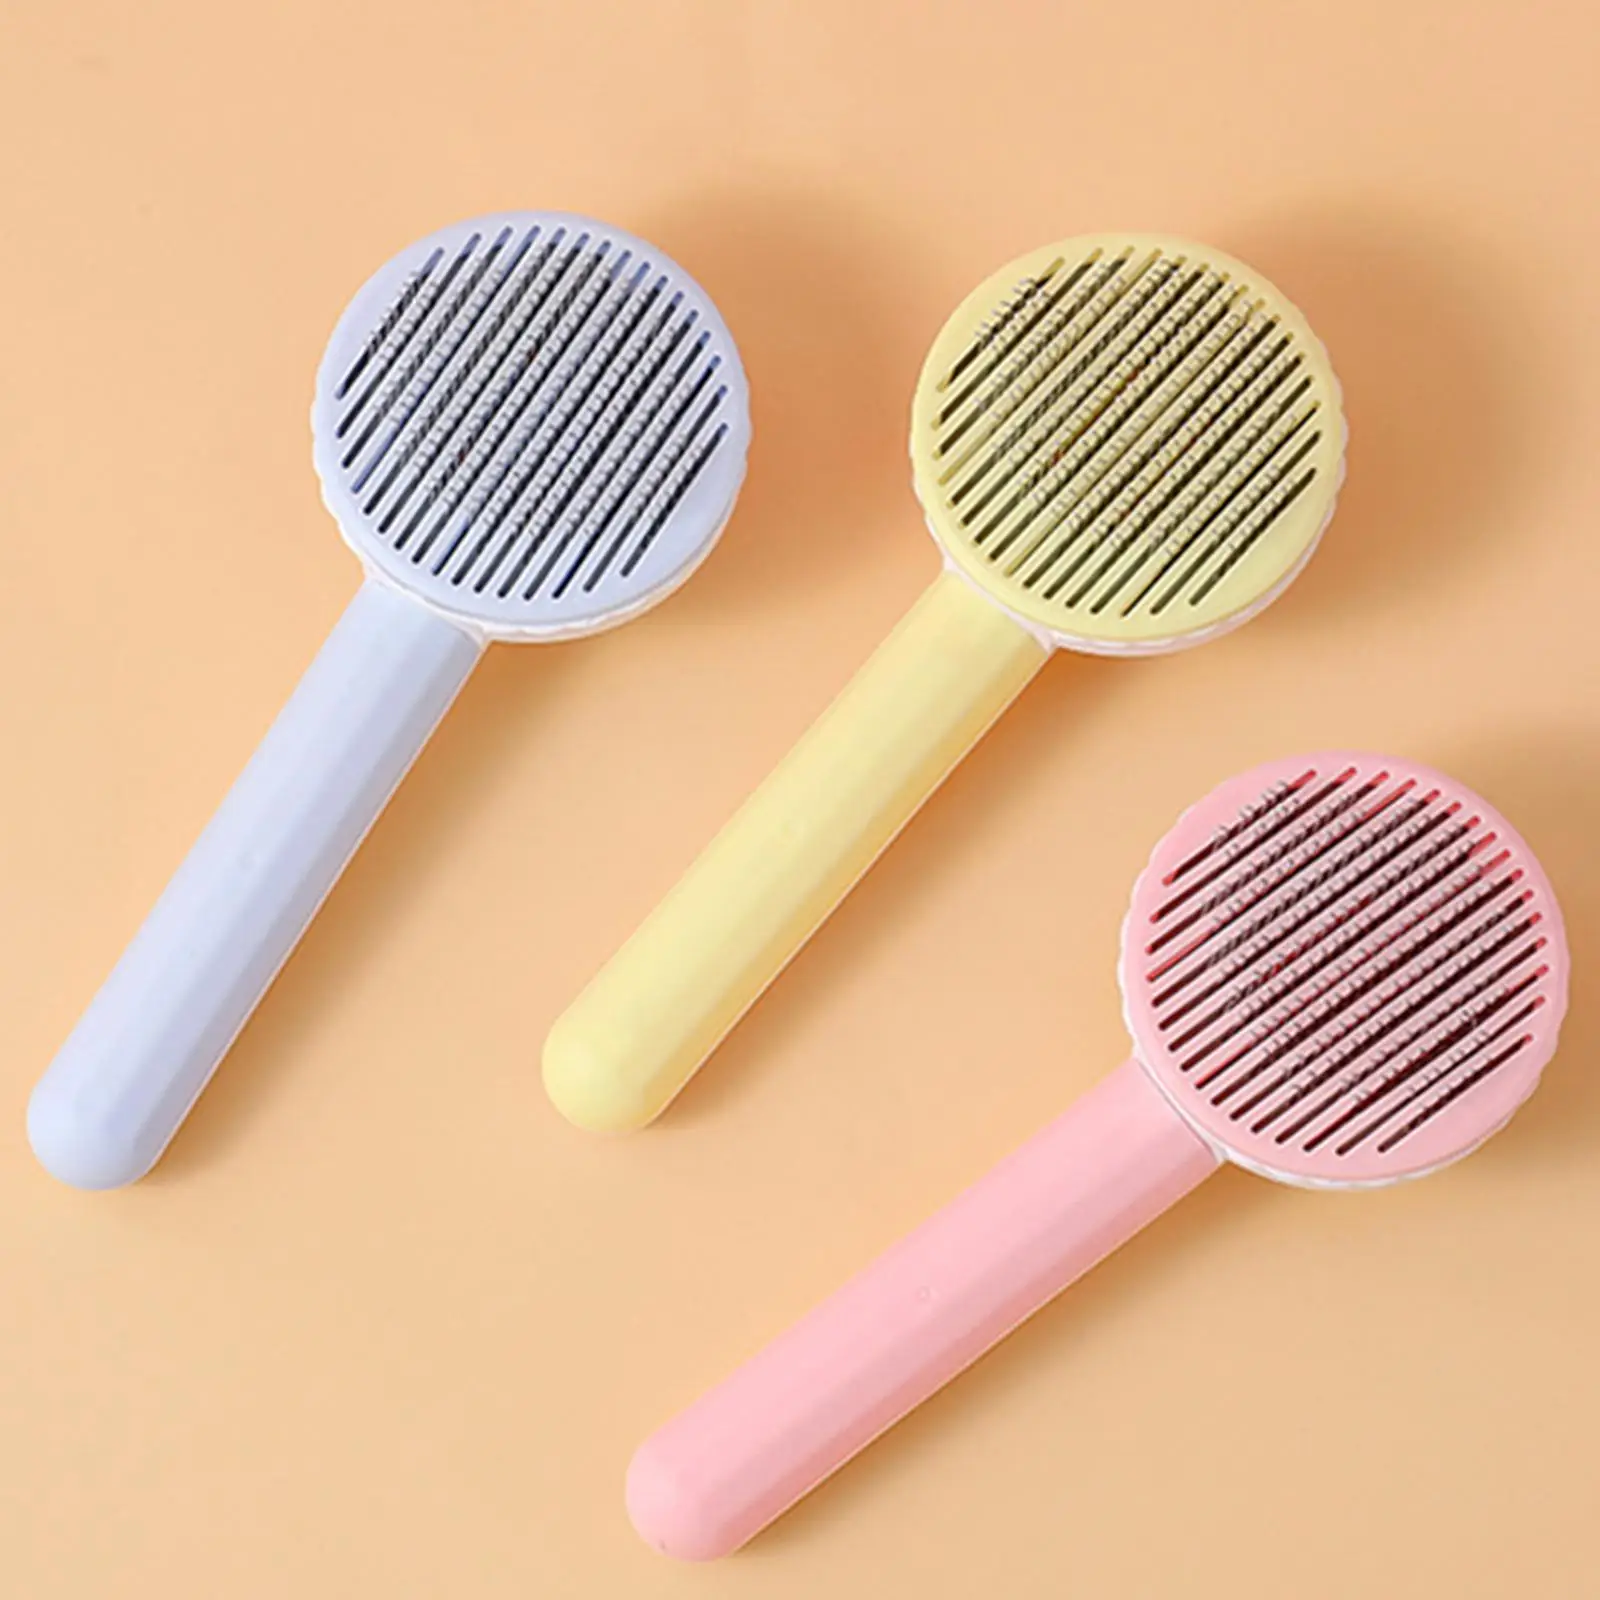 

Pet Cat Brush Self Cleaning Slicker Brush for Cats Dogs Hair Removes Pet Hair Removal Comb Pets Grooming Tool Cat Accessories